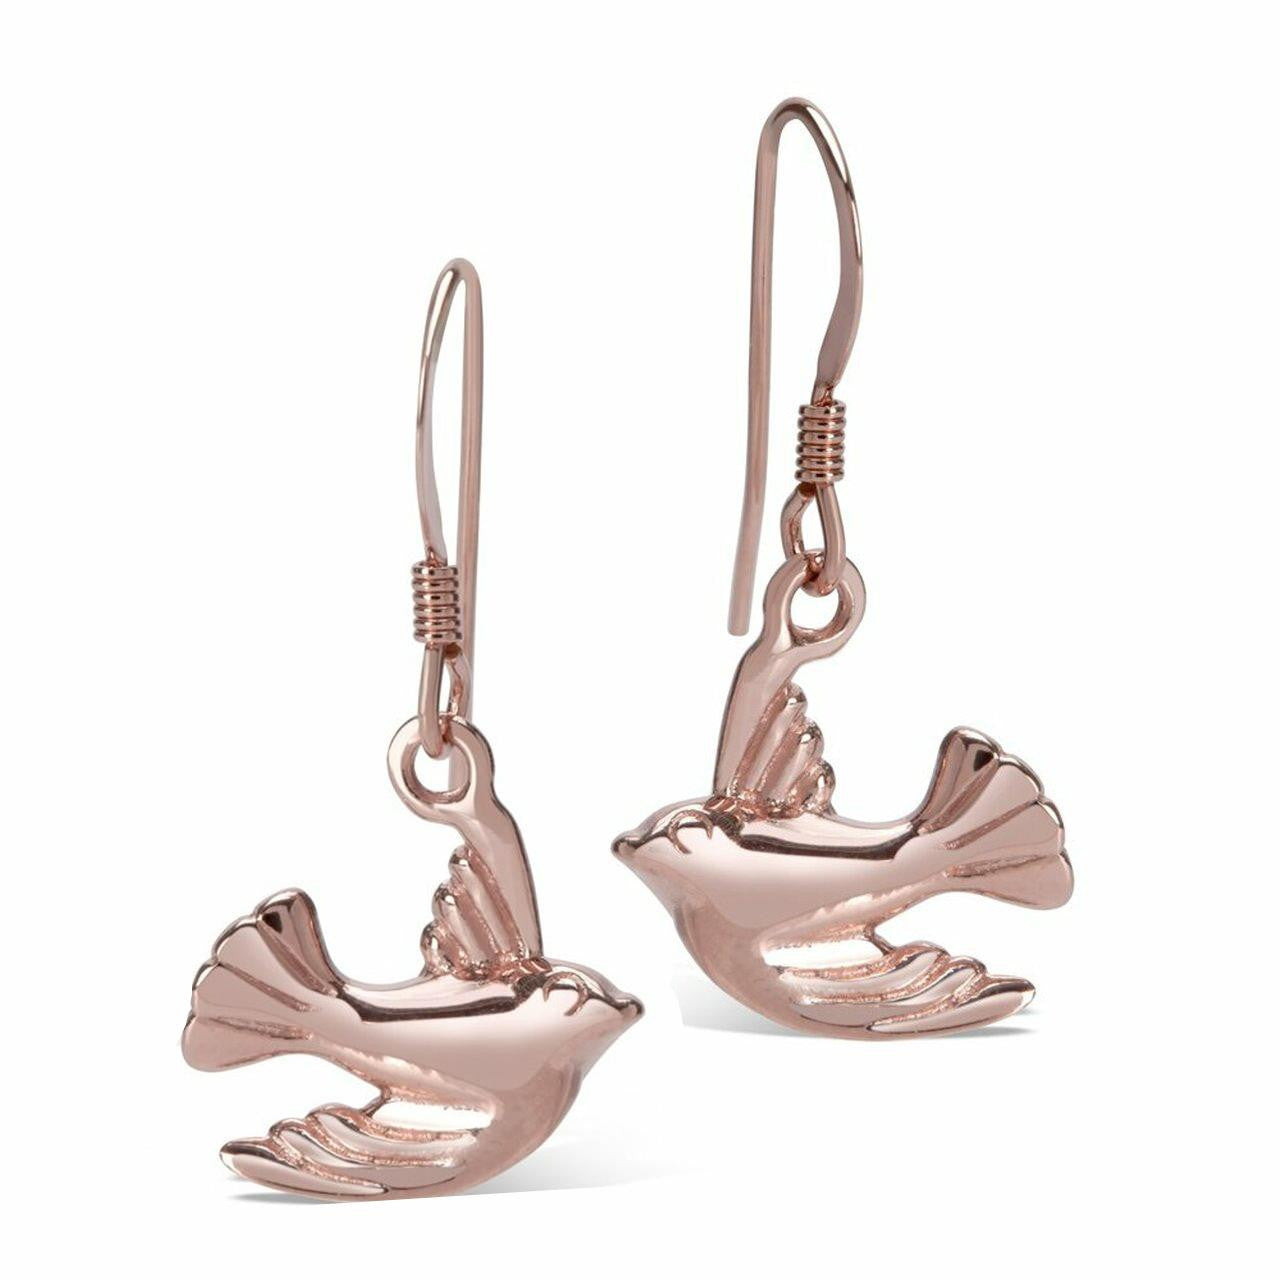 bird earrings in rose gold on a white background